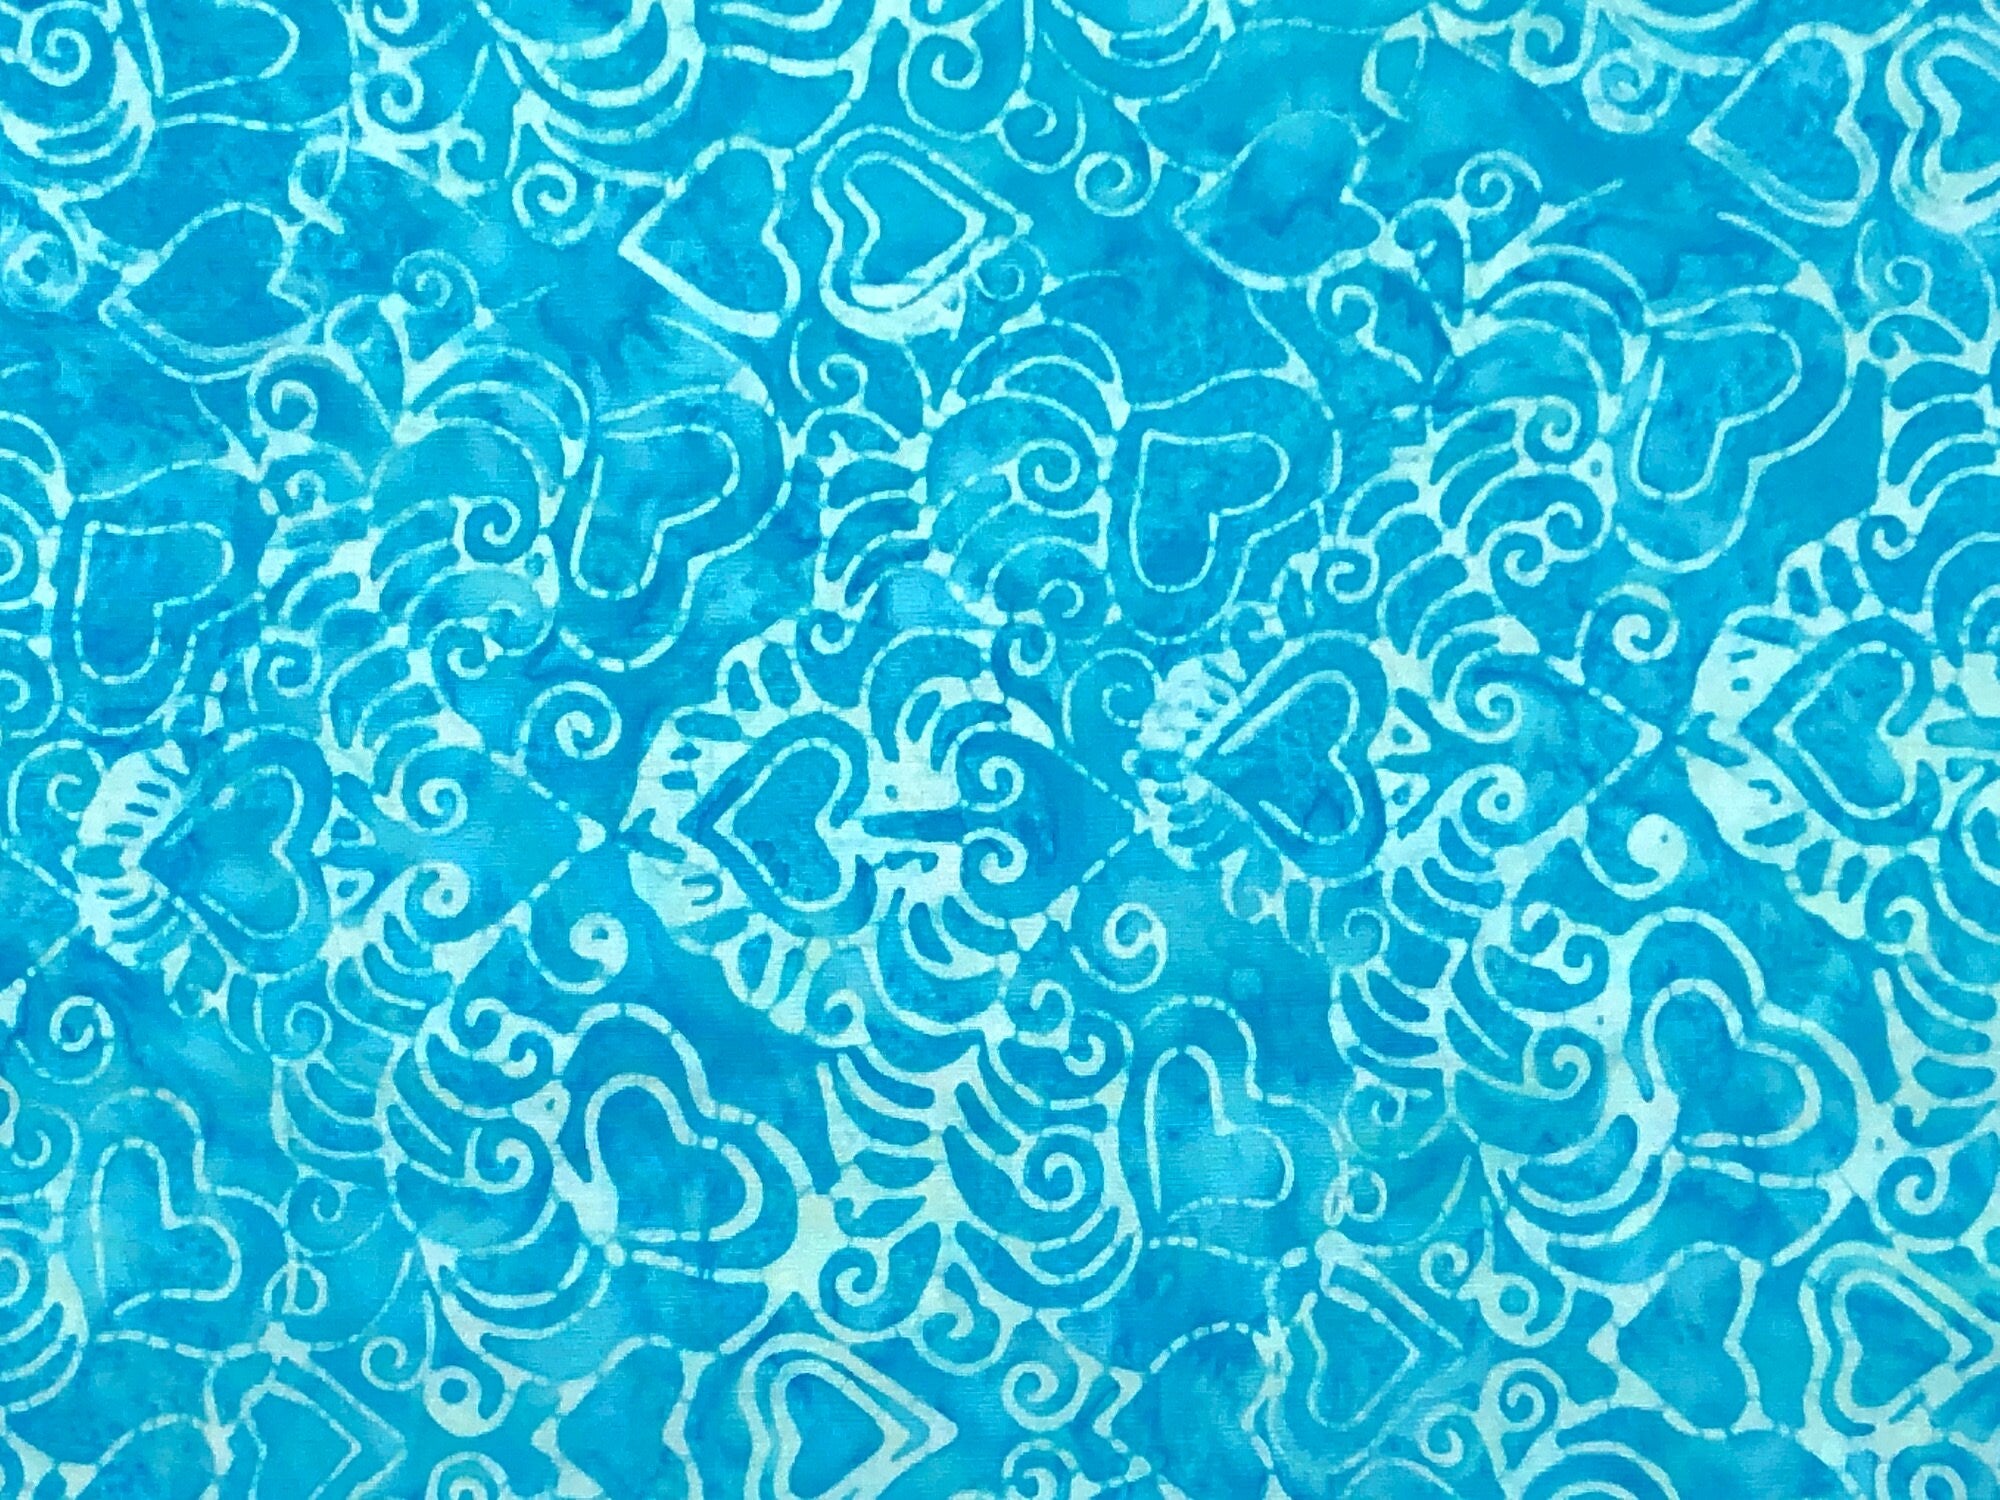 This fabric is part of the Love & Kisses Collection and is covered with hearts. This turquoise batik fabric is called Funky 70's waterfall.